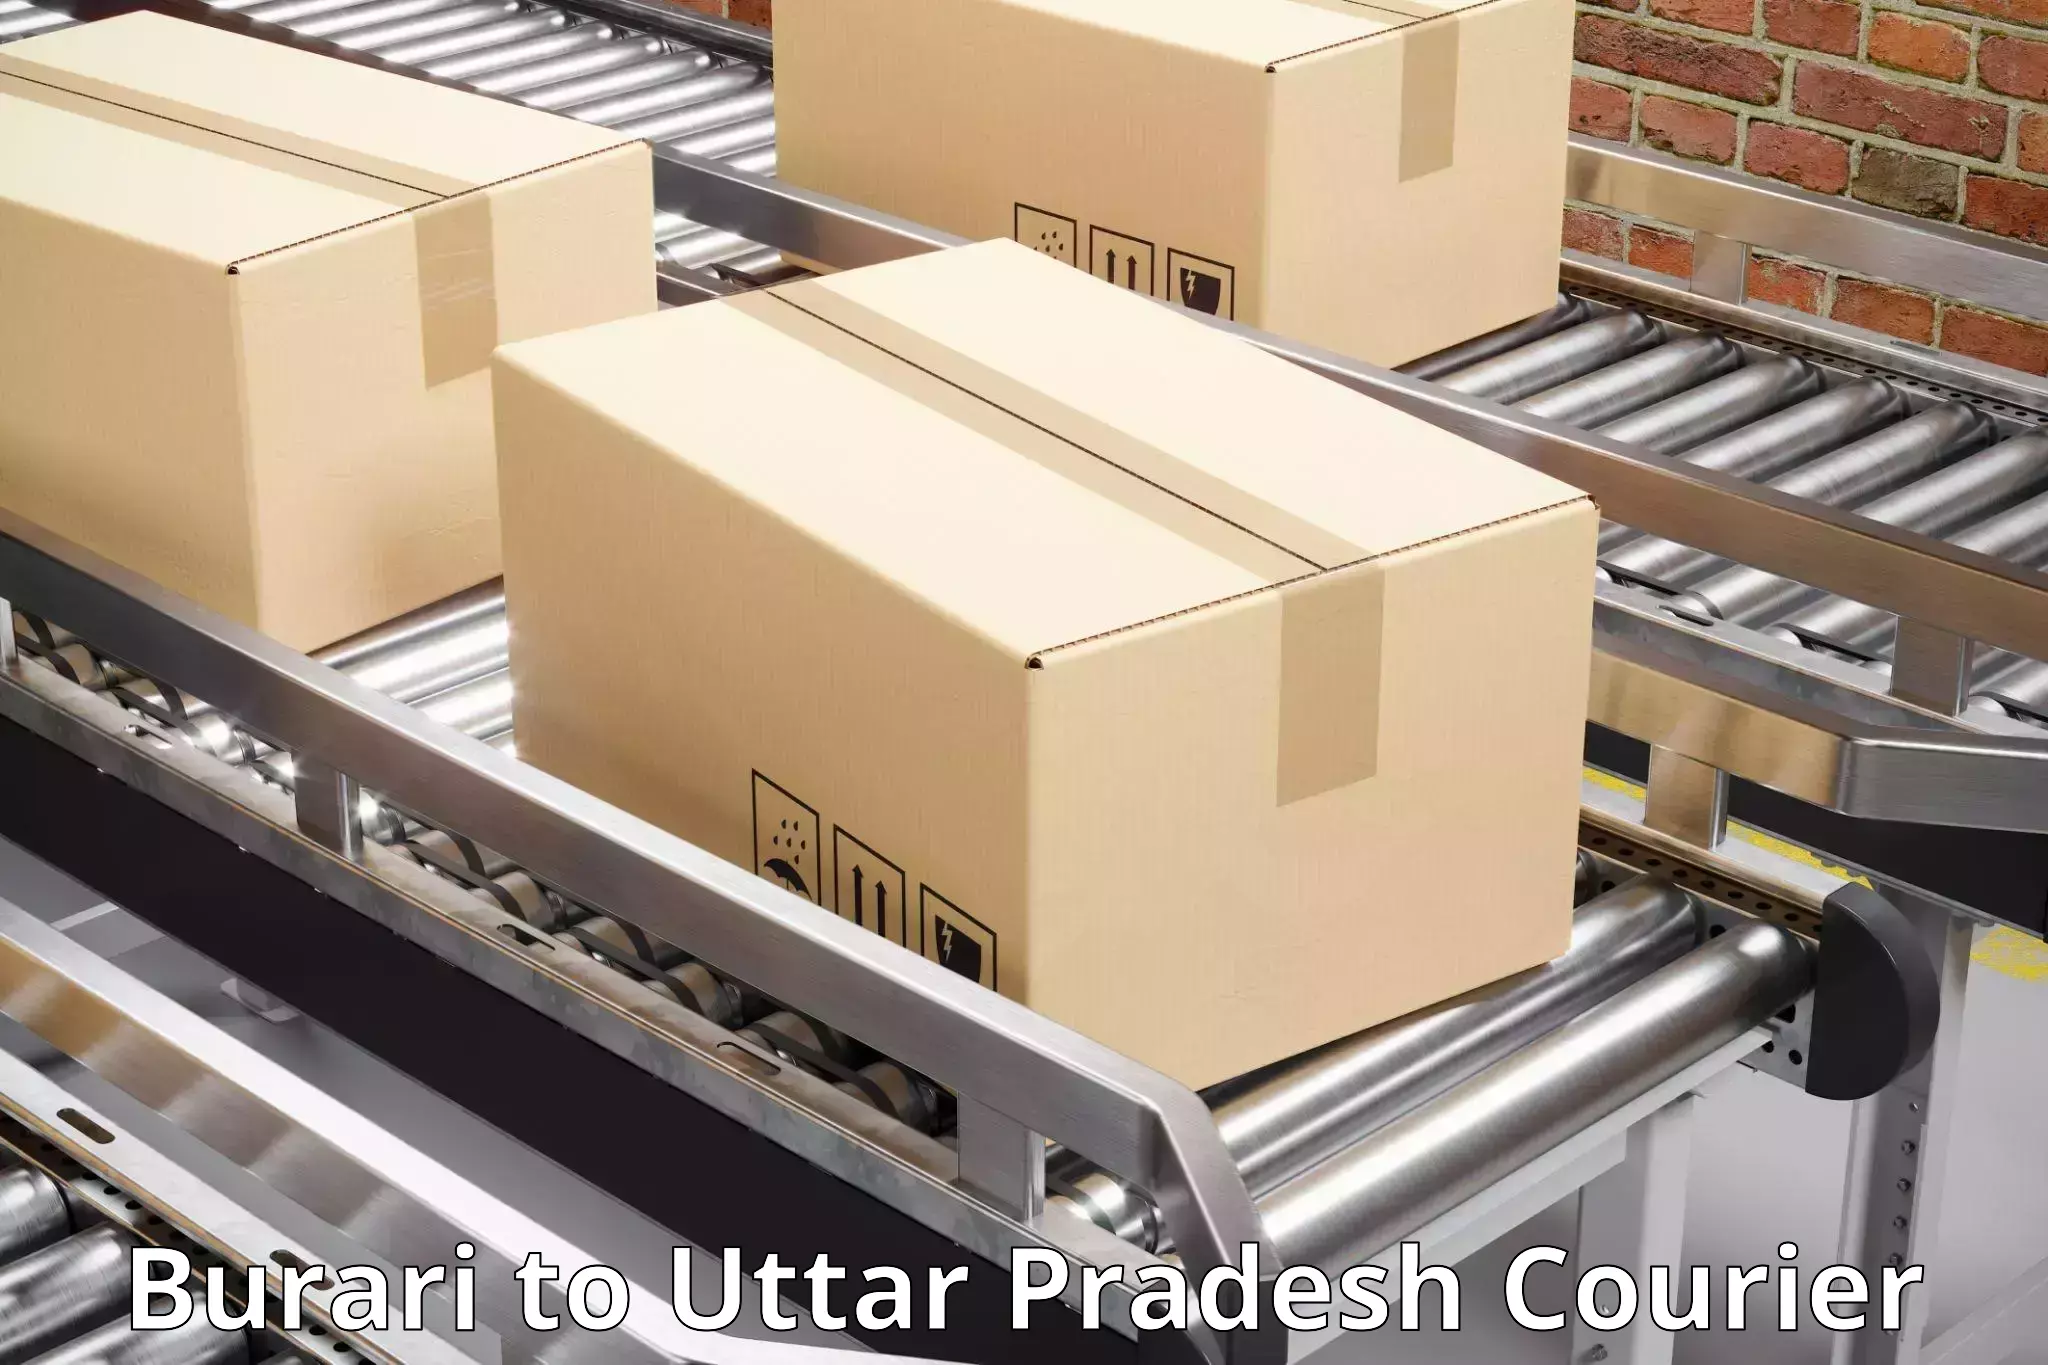 Global courier networks Burari to Sultanpur